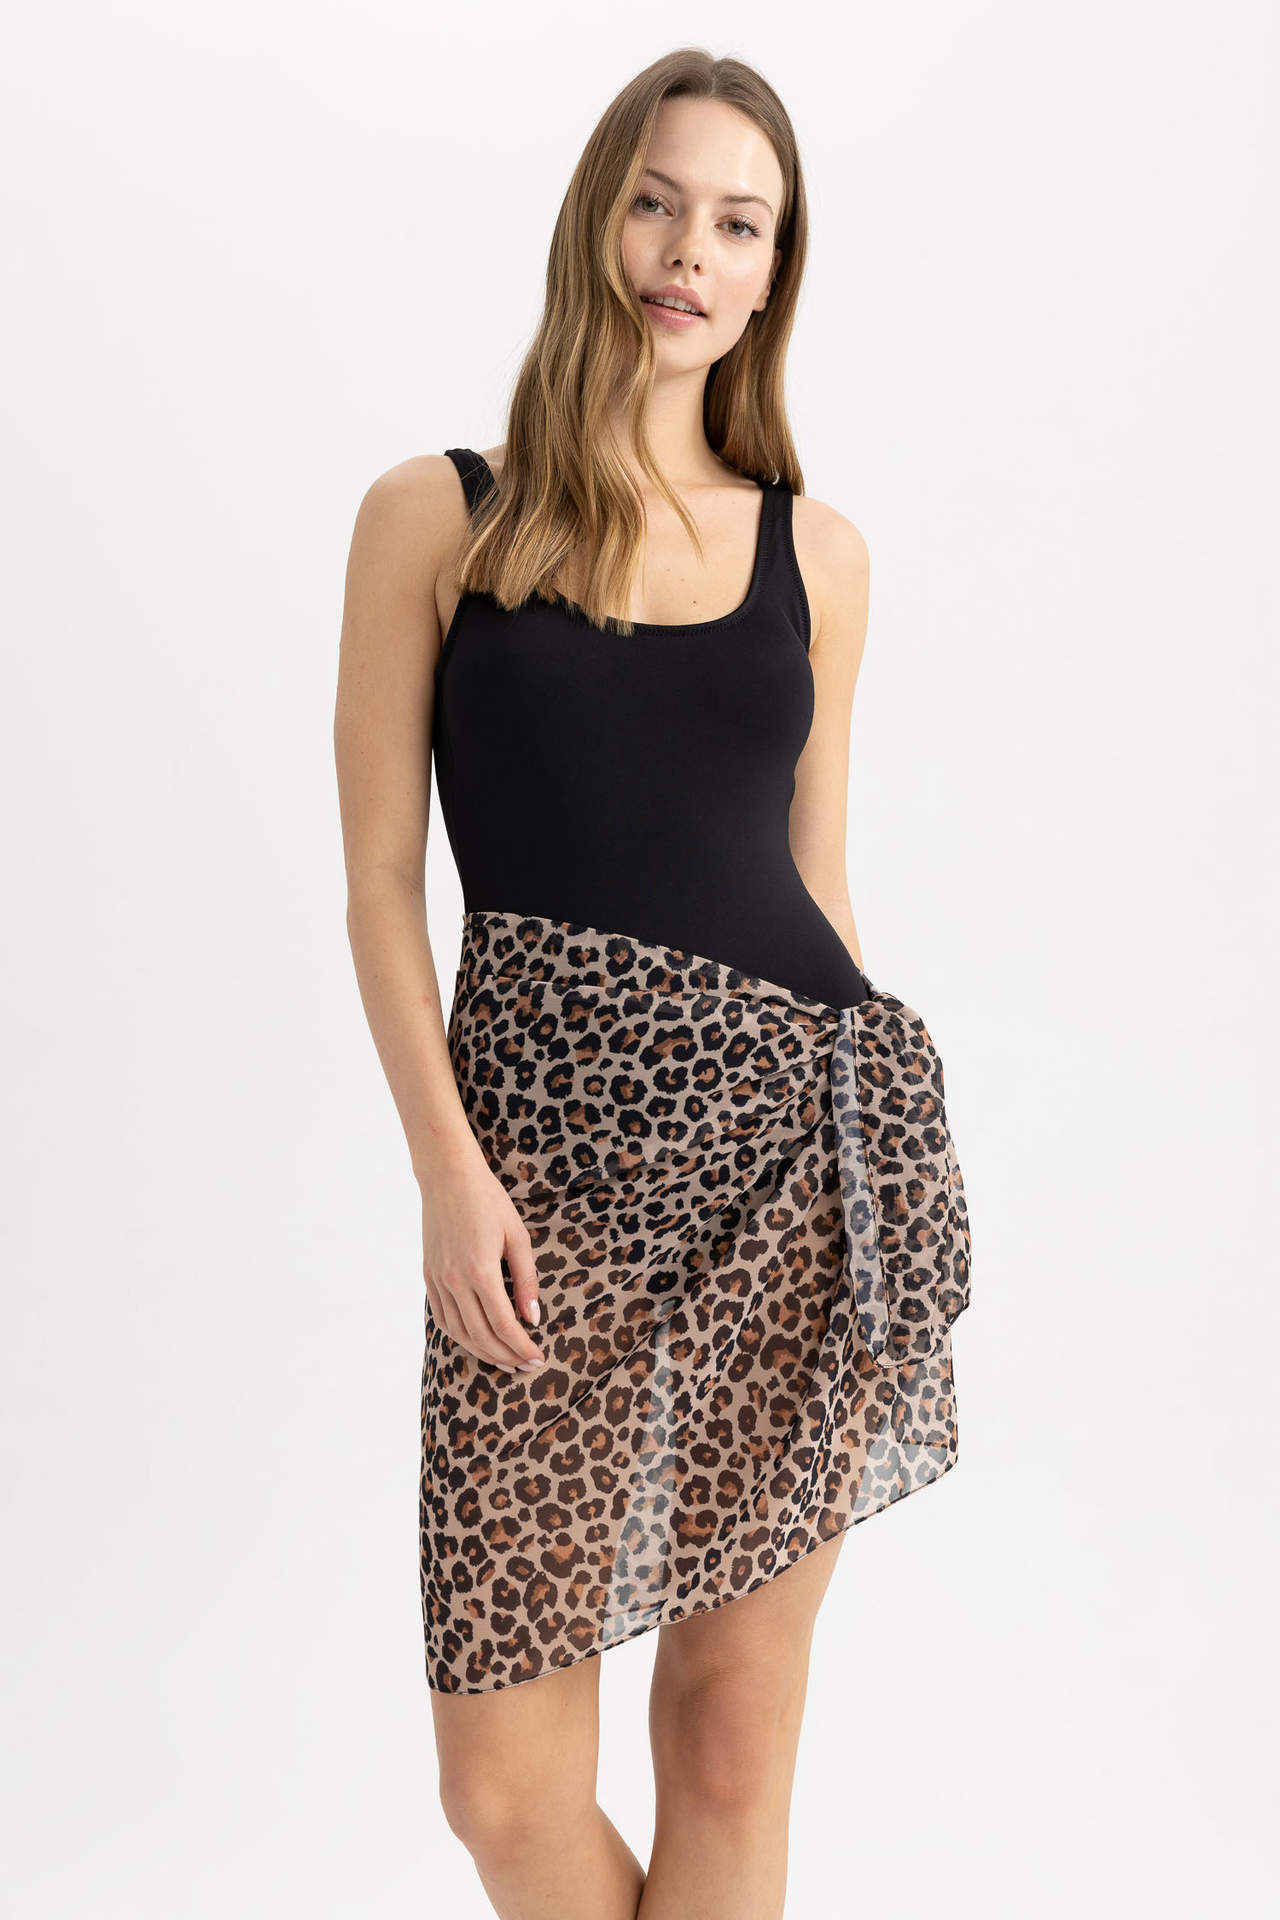 Levně DEFACTO Fall in Love Regular Fit Leopard Patterned Chiffon Pareo with Waist Tie